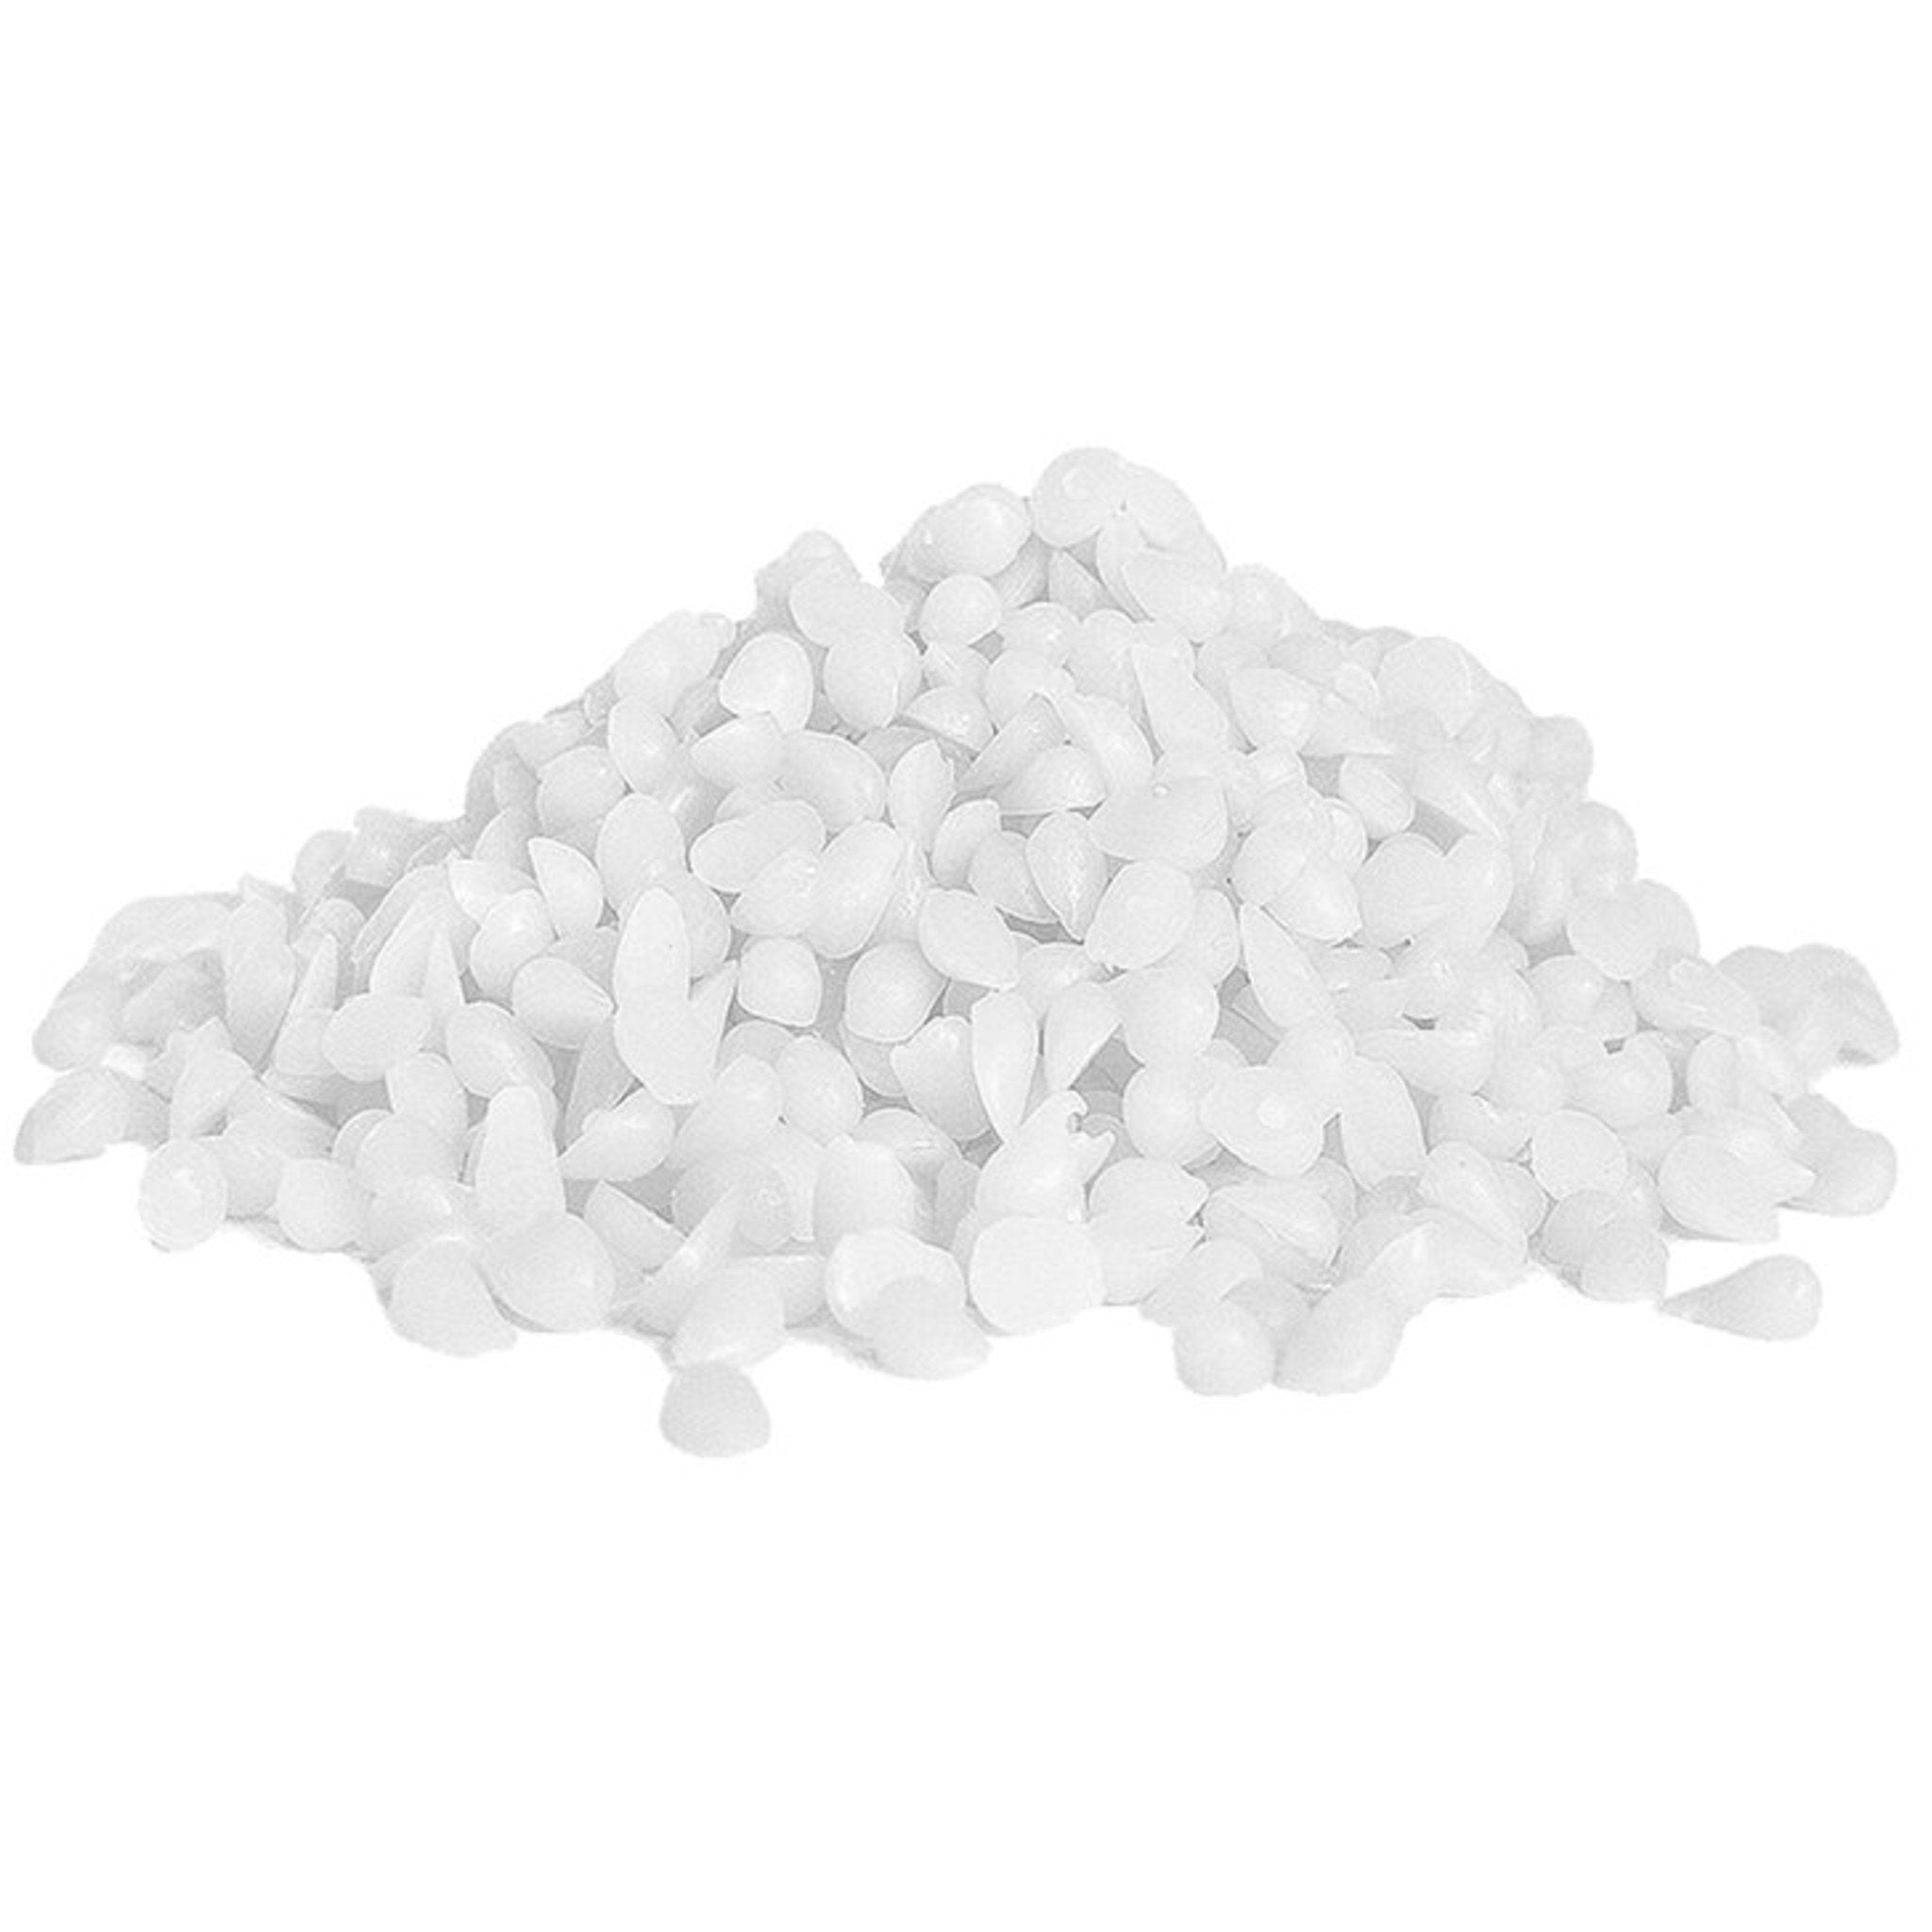 2 4 8 15 oz Pure Natural White Beeswax Pellets Pastilles for